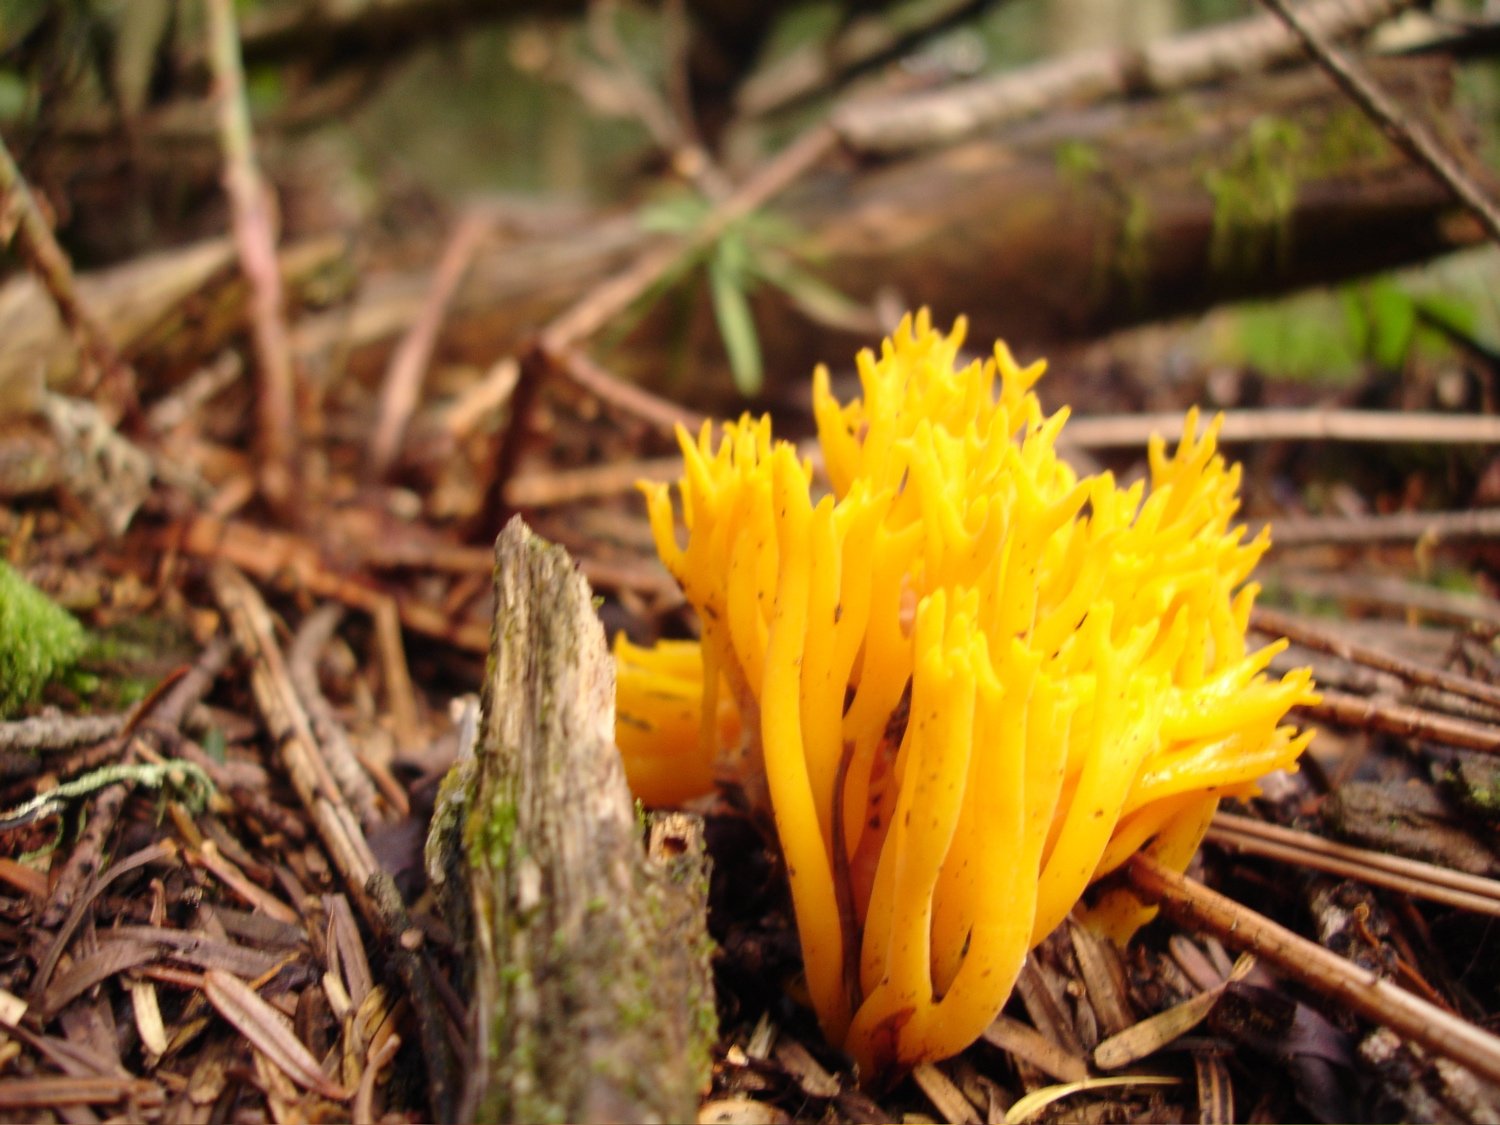 a small yellow mushroom sprouts through the forest